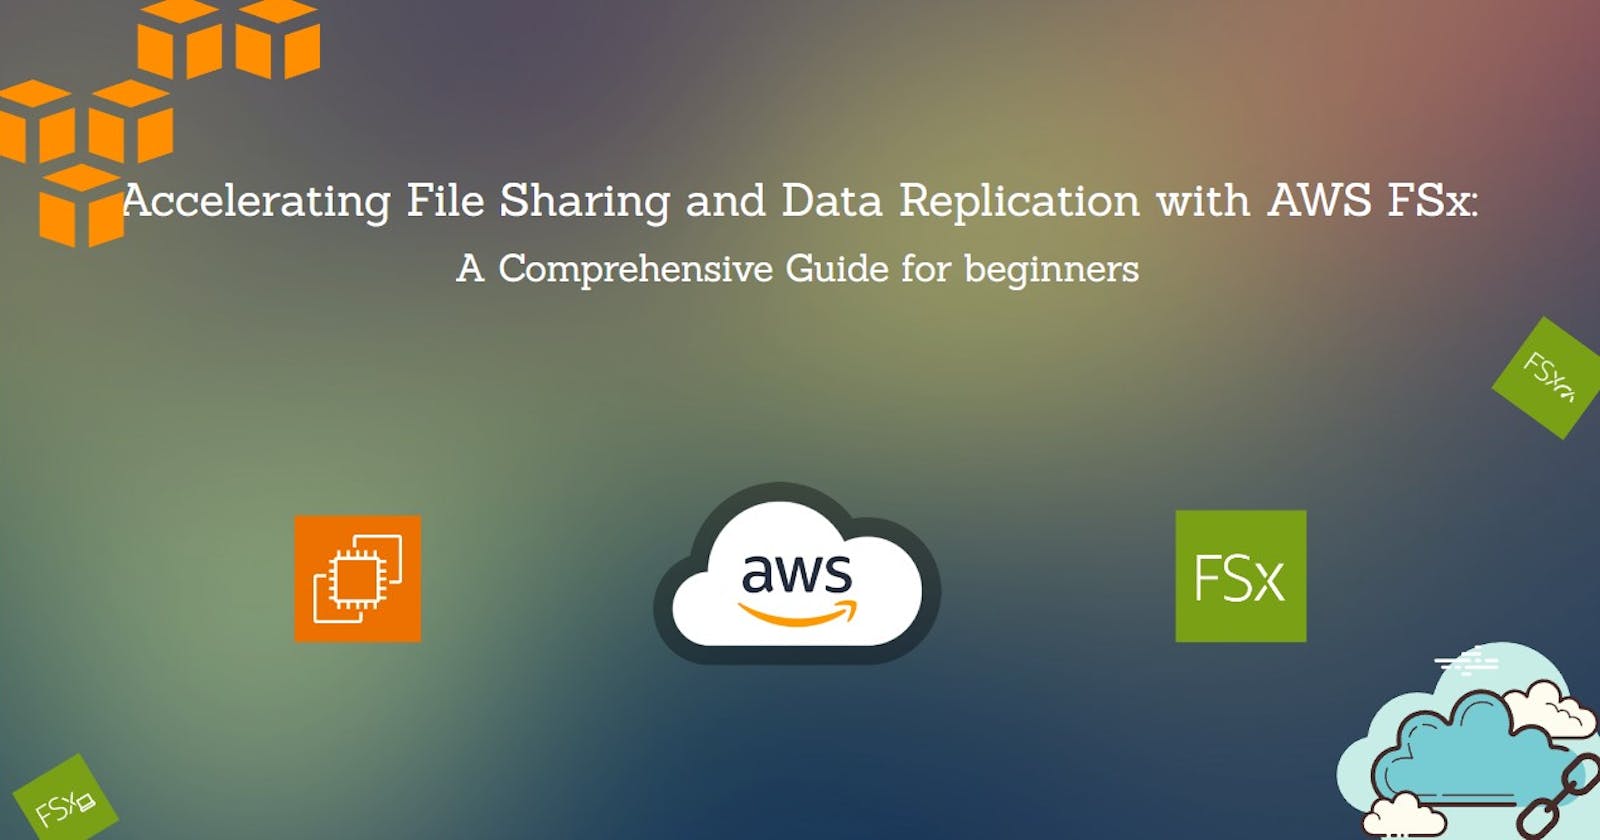 Accelerating File Sharing and Data Replication with AWS FSx: A Comprehensive Guide for beginners